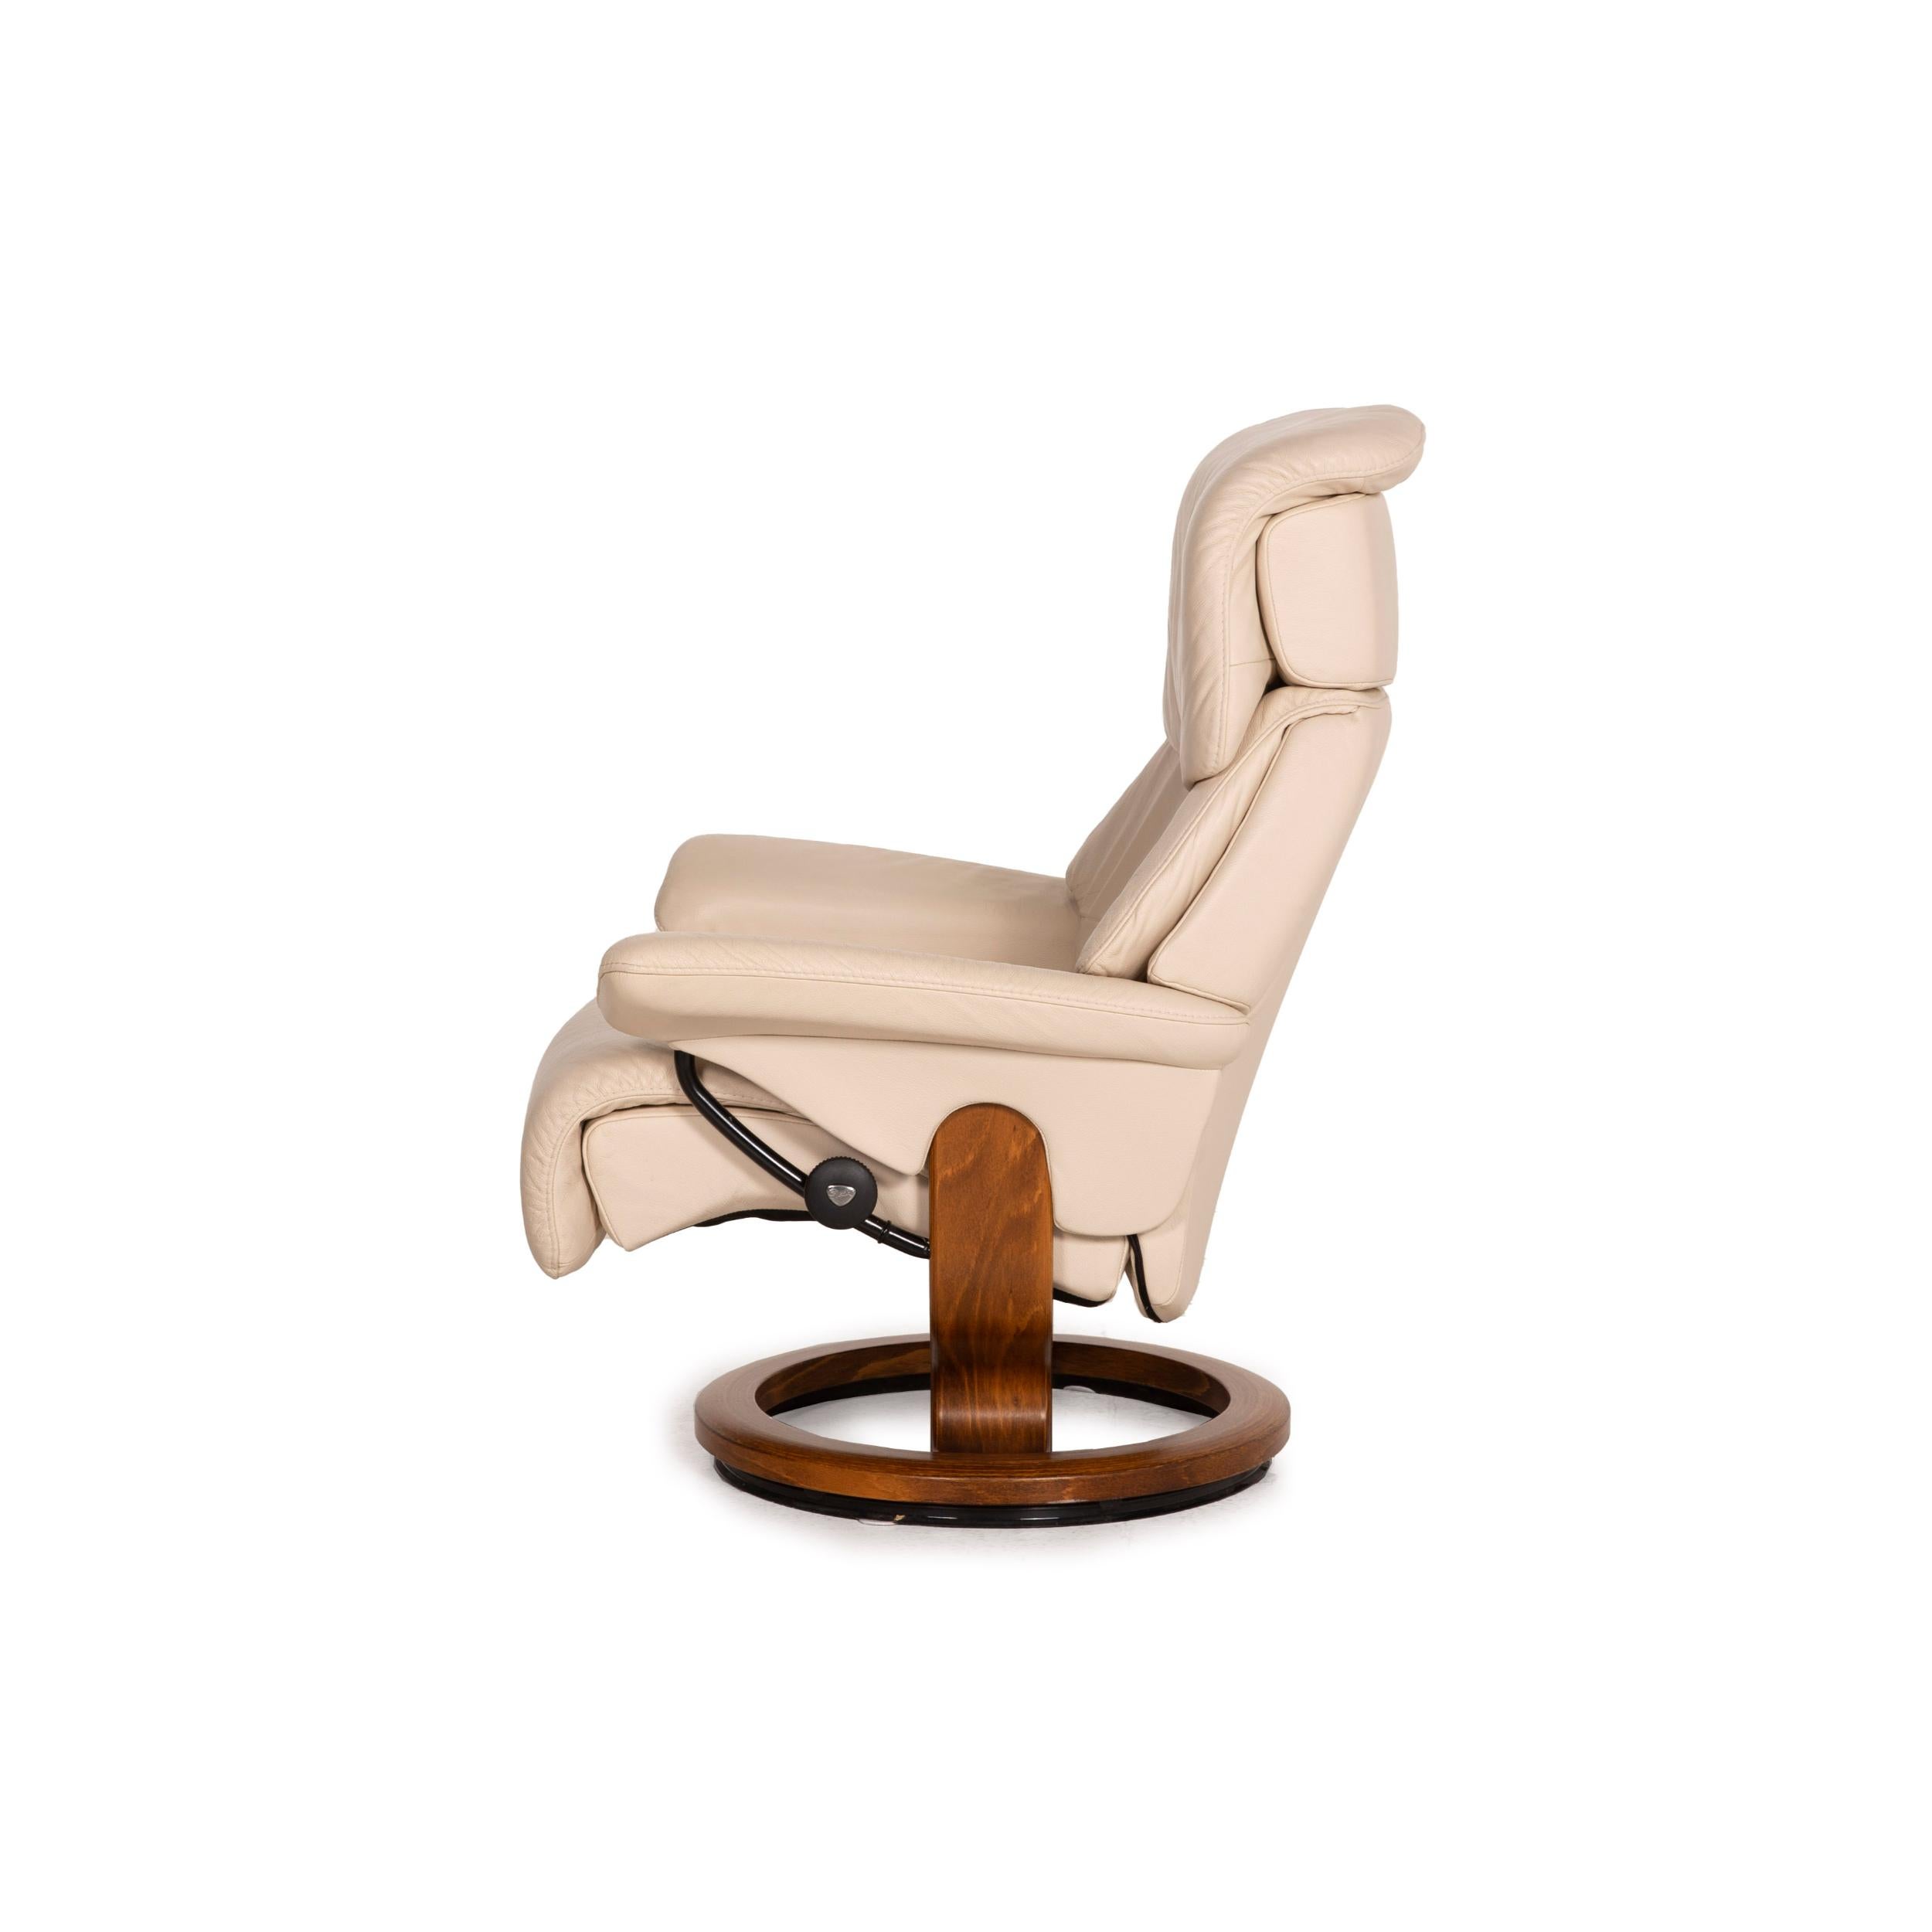 Stressless Vision Leather Armchair Cream Incl. Stool Relaxation Function 6